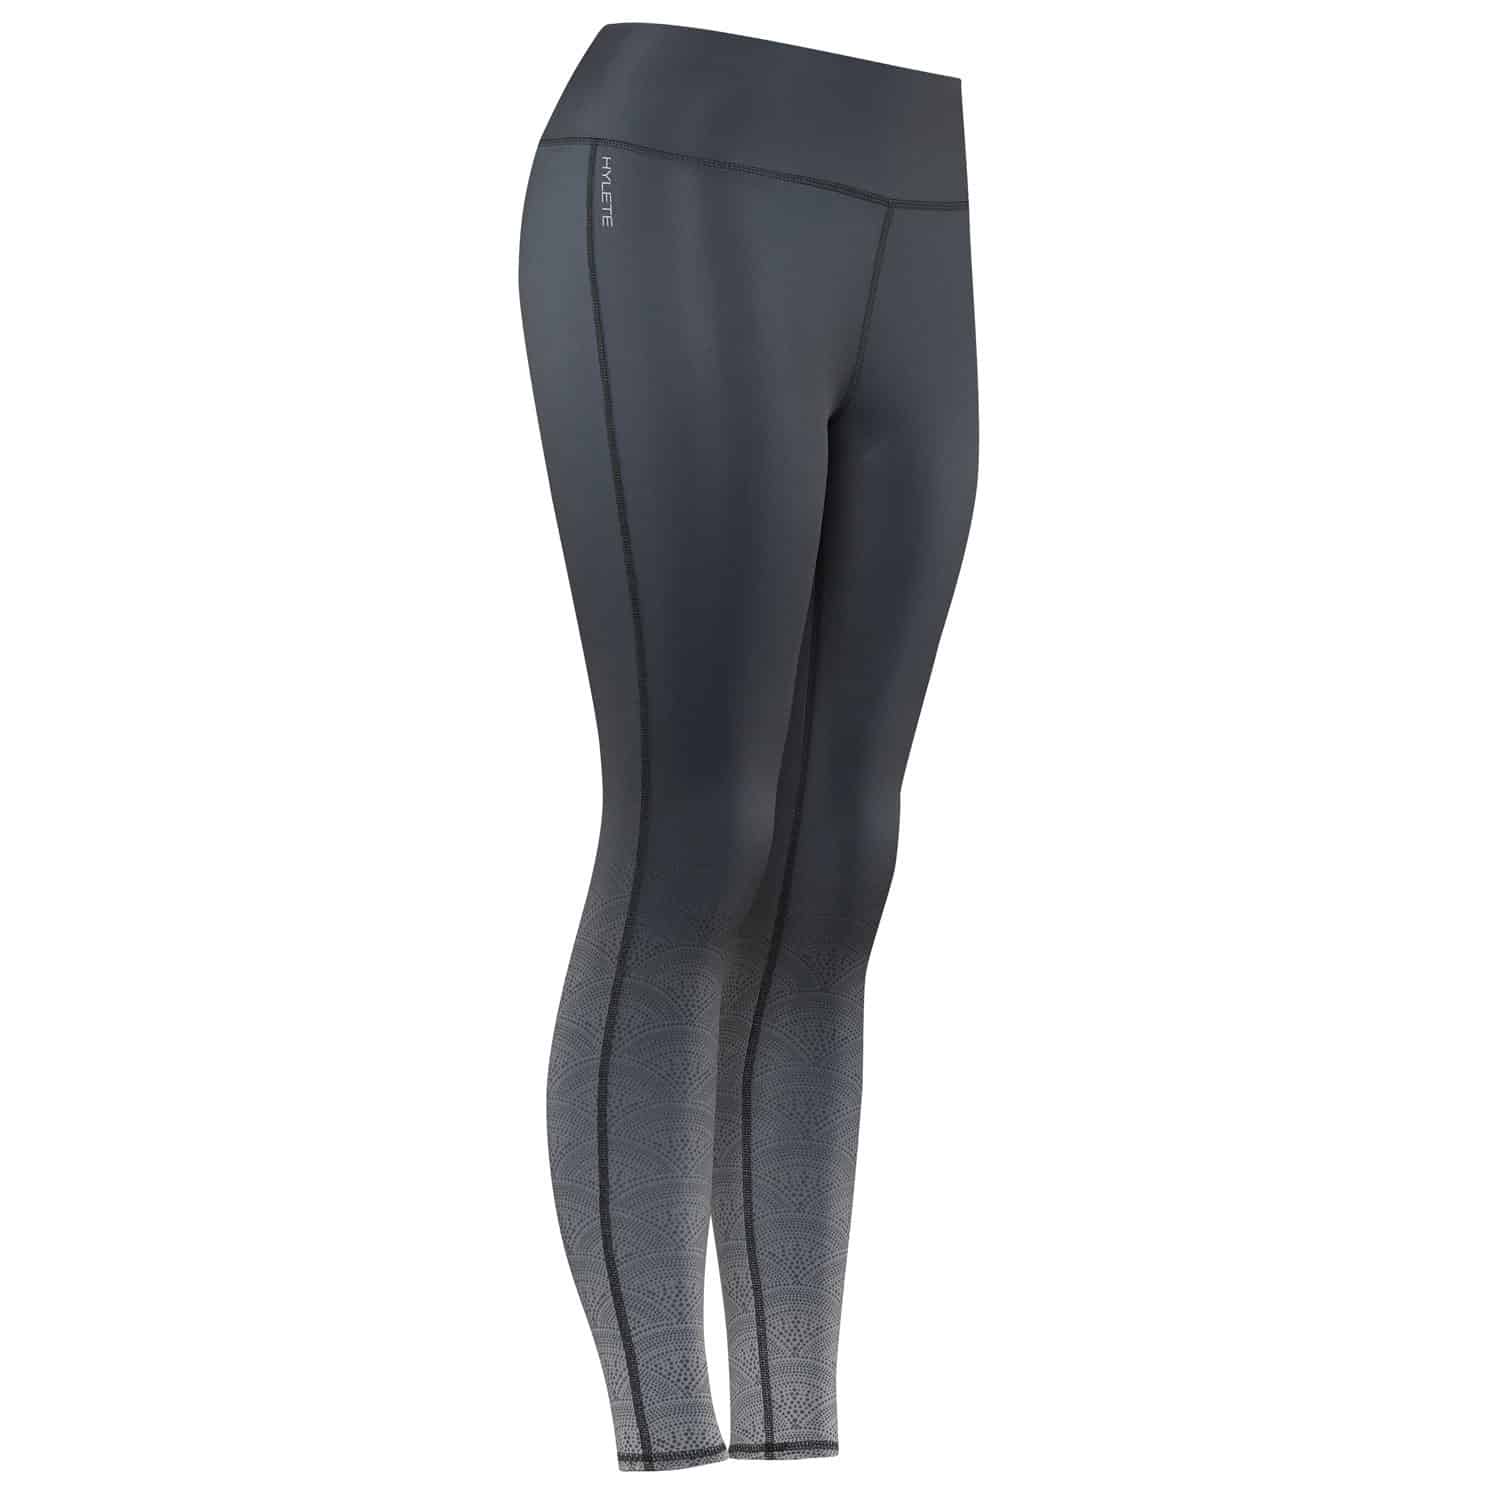 Motiv II Workout Tights for CrossFit from Hylete Review - Cross Train ...